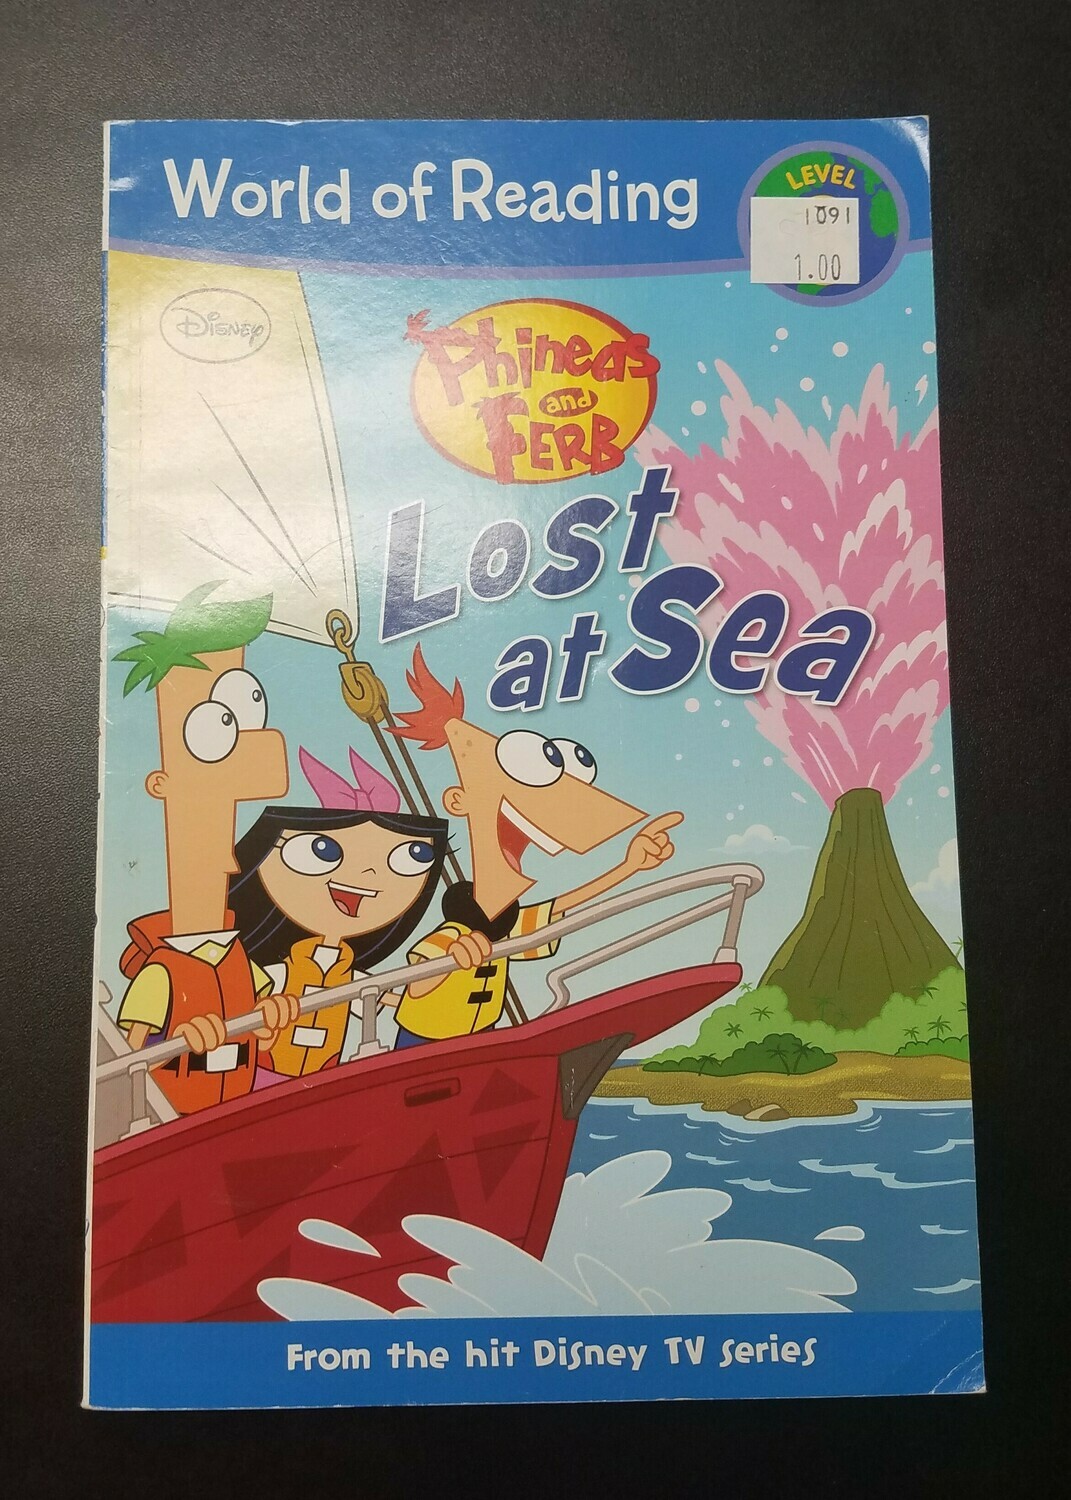 Phineas and Ferb: Lost at Sea by Leigh Stephens